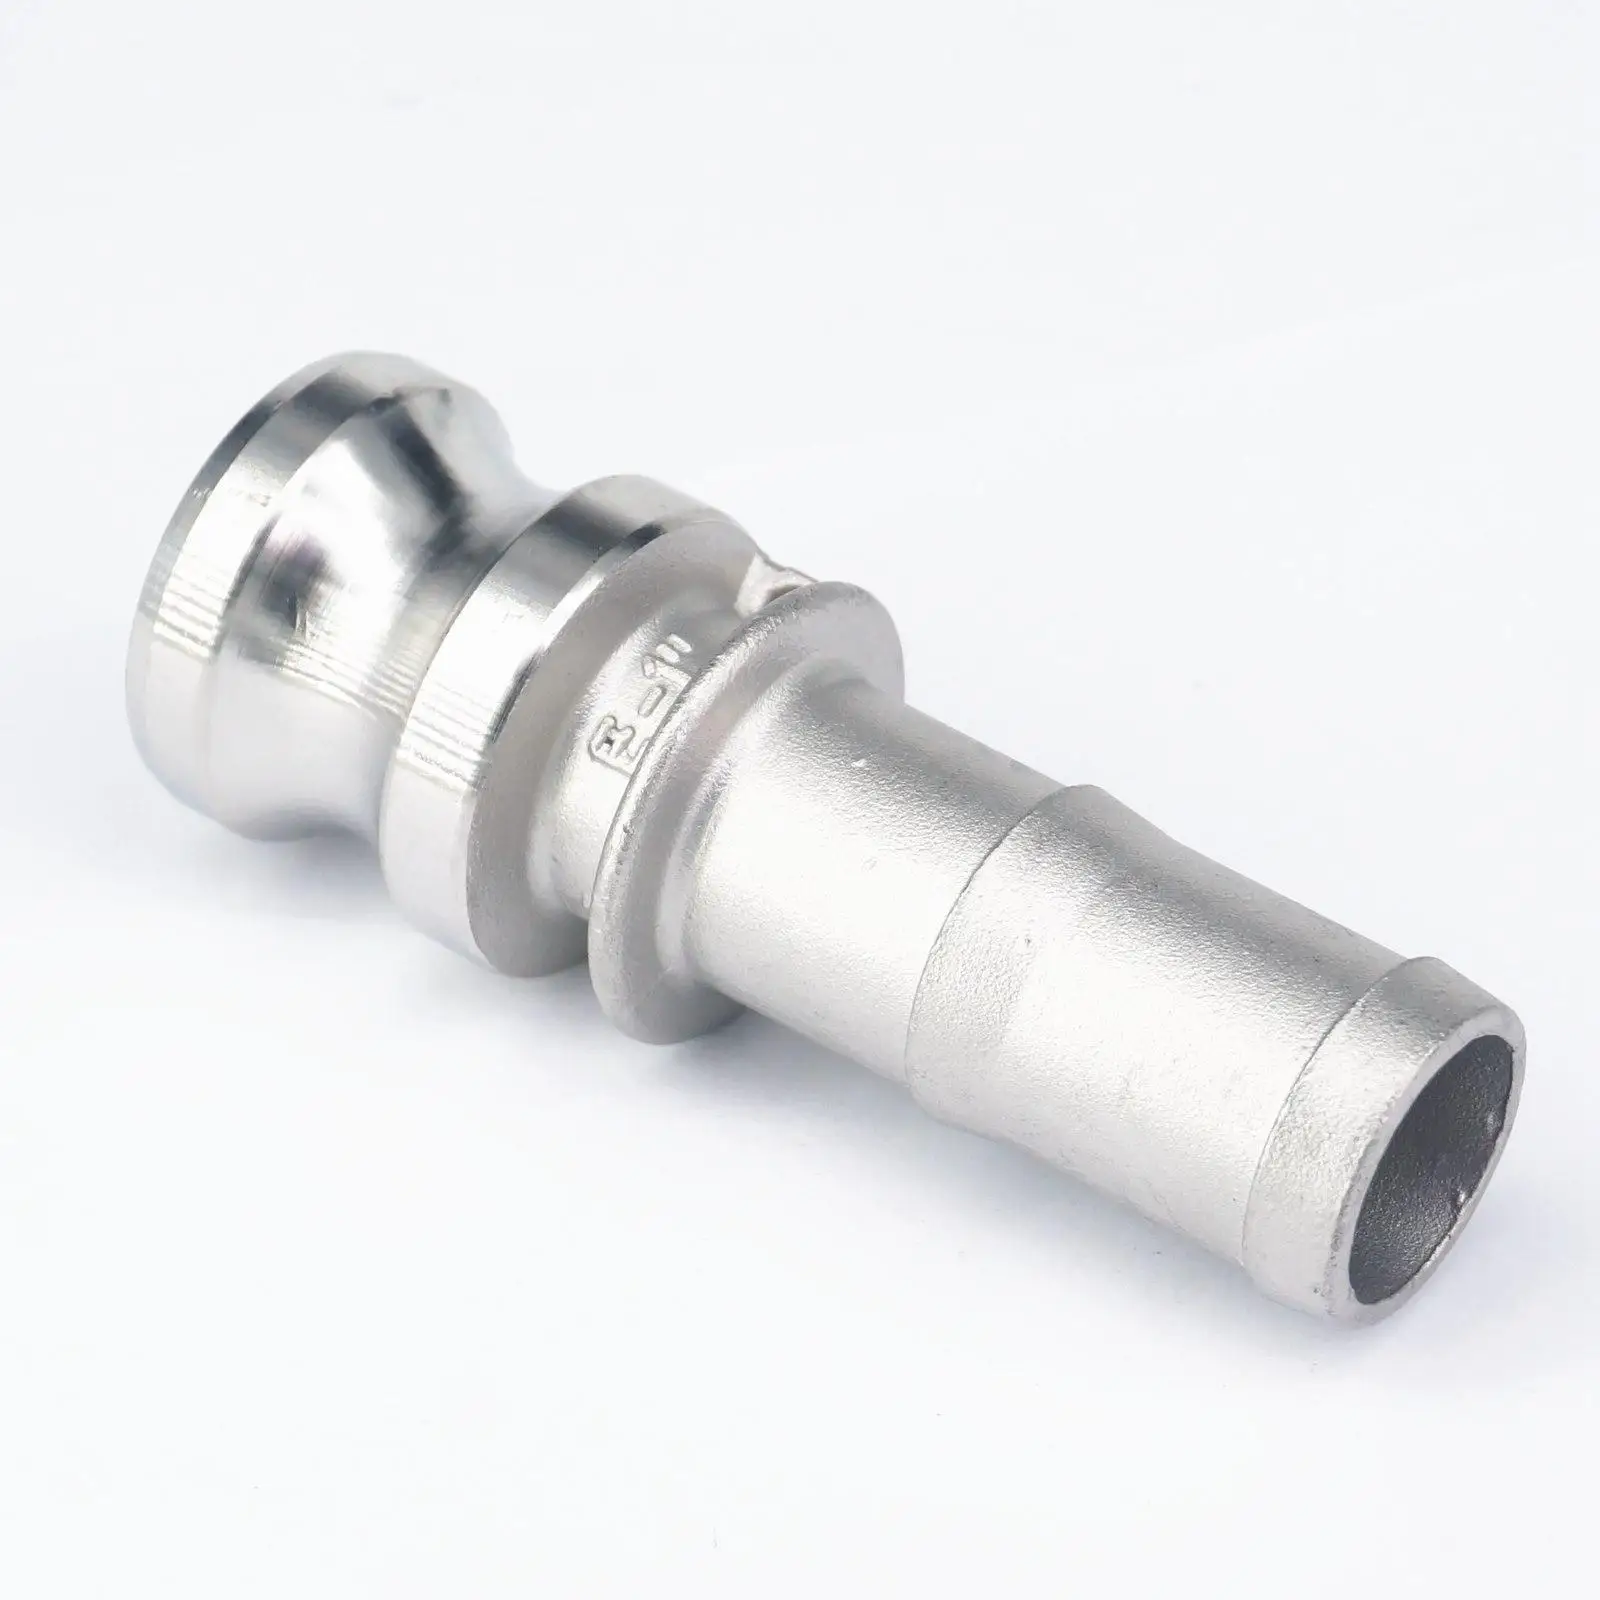 1/2 Hose Tail Barb 304 Stainless Steel Type C Socket Camlock Fitting Cam and Groove Coupler Ochoos Valve Needles 